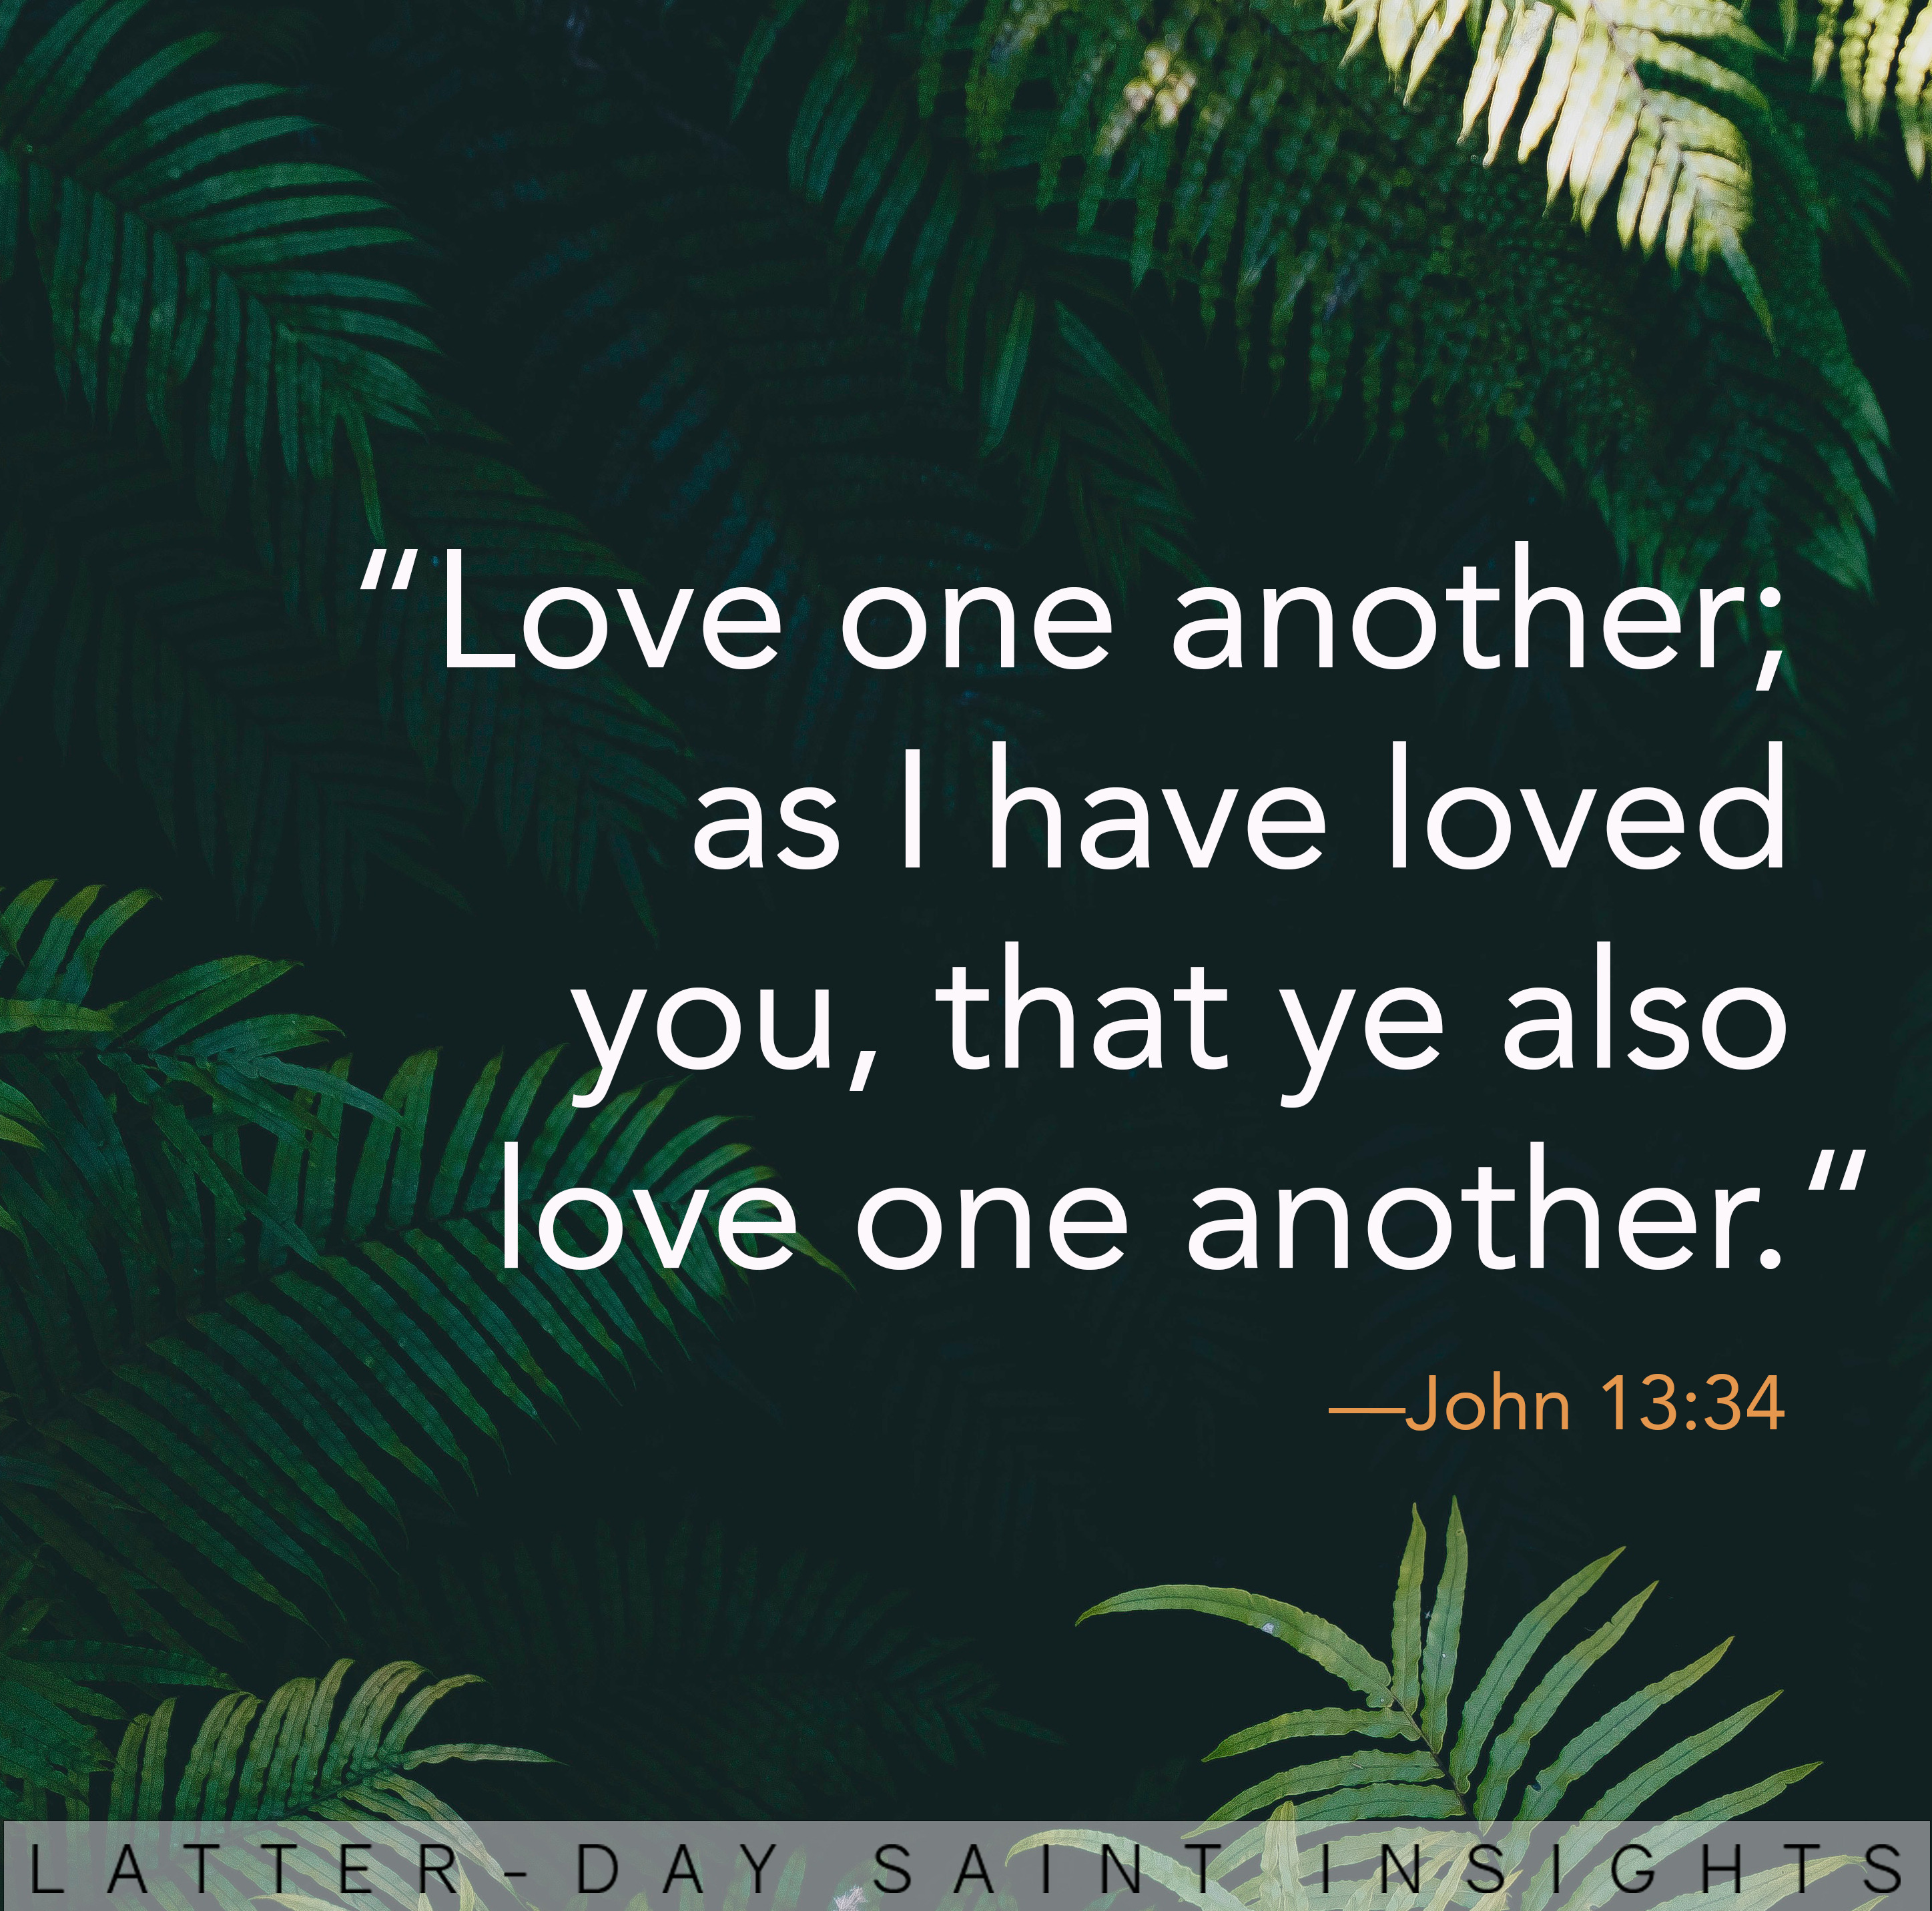 "Love one another; as I have loved you, that ye also love one another." —John 13:34